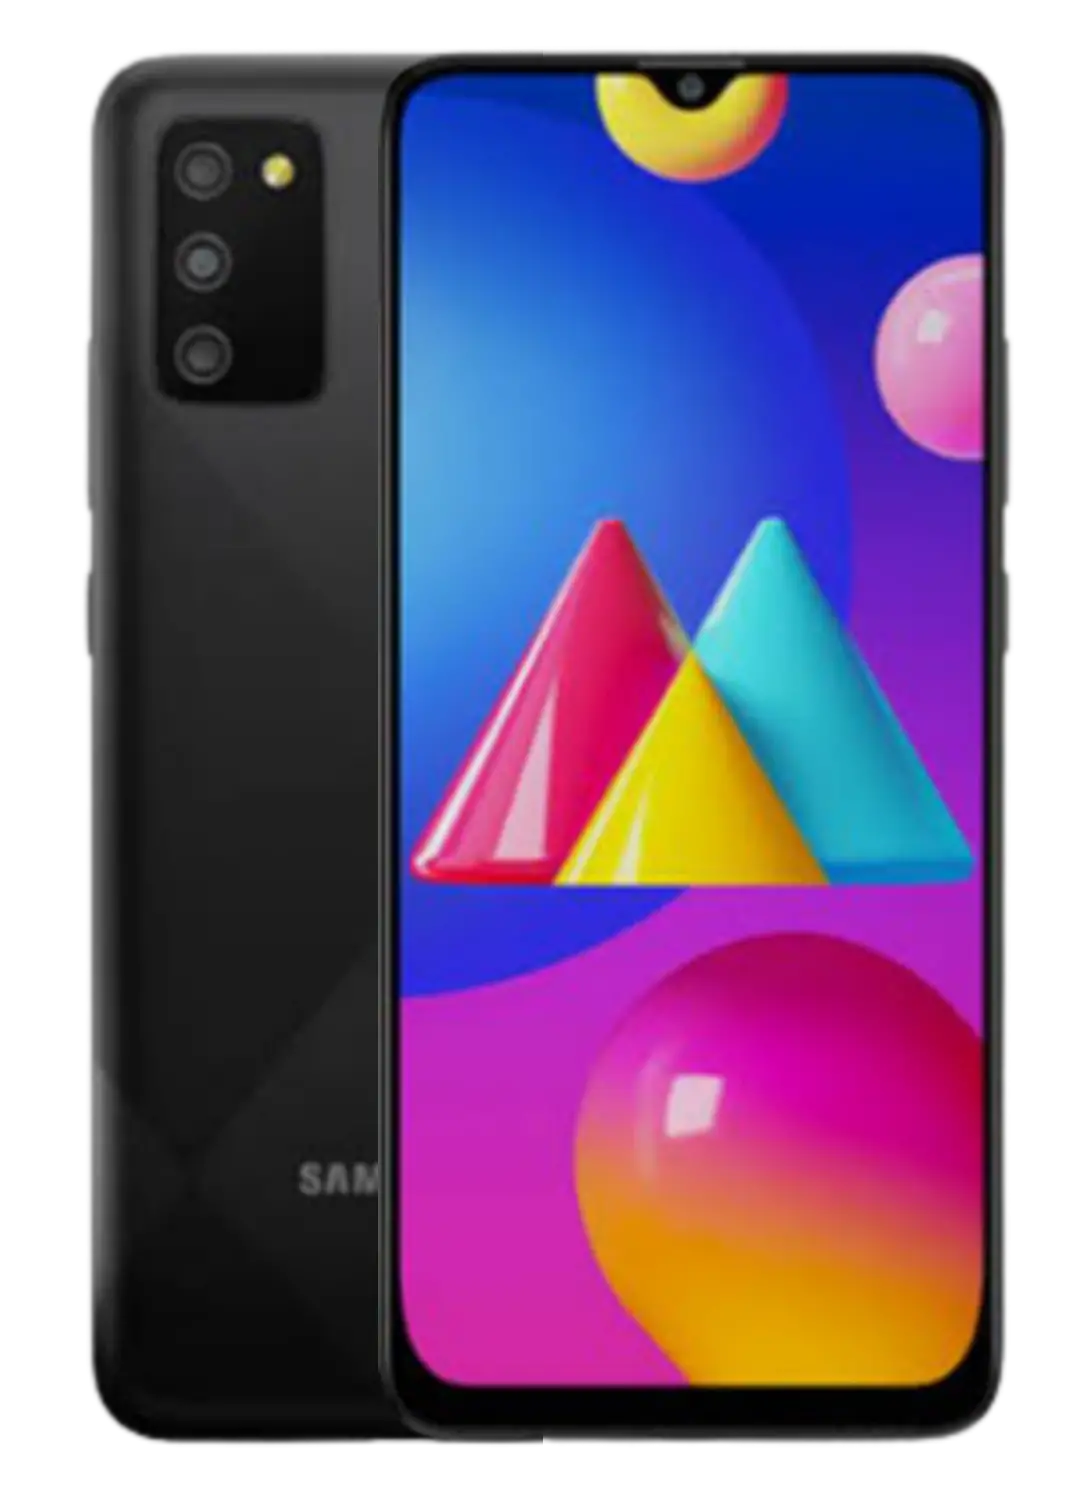 Samsung Galaxy M02s – Full Specifications